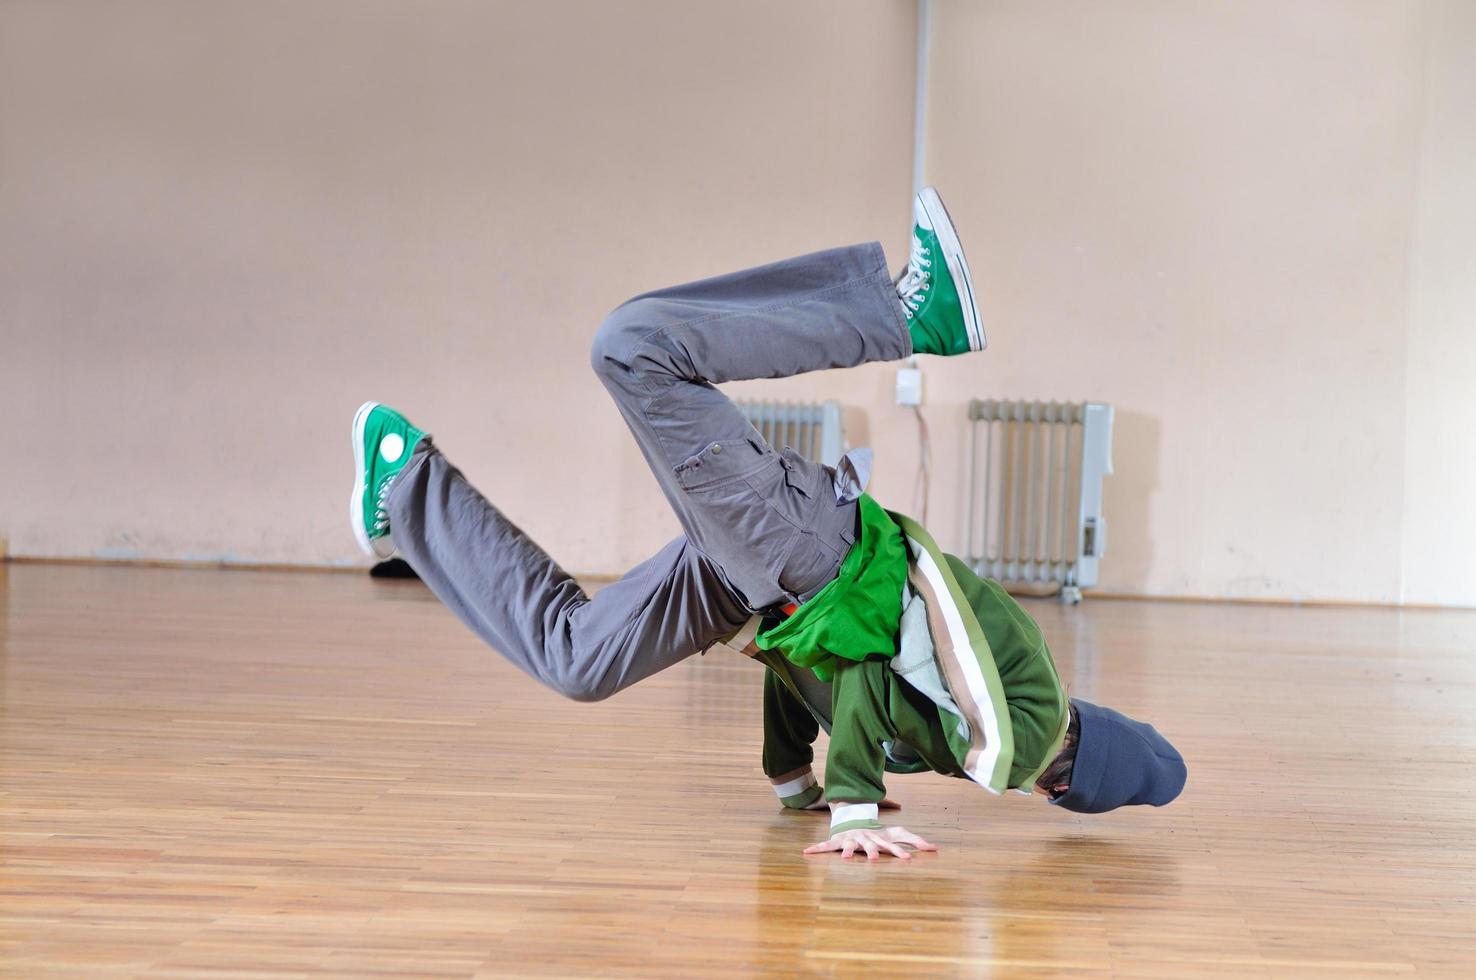 Breakdance group view photo